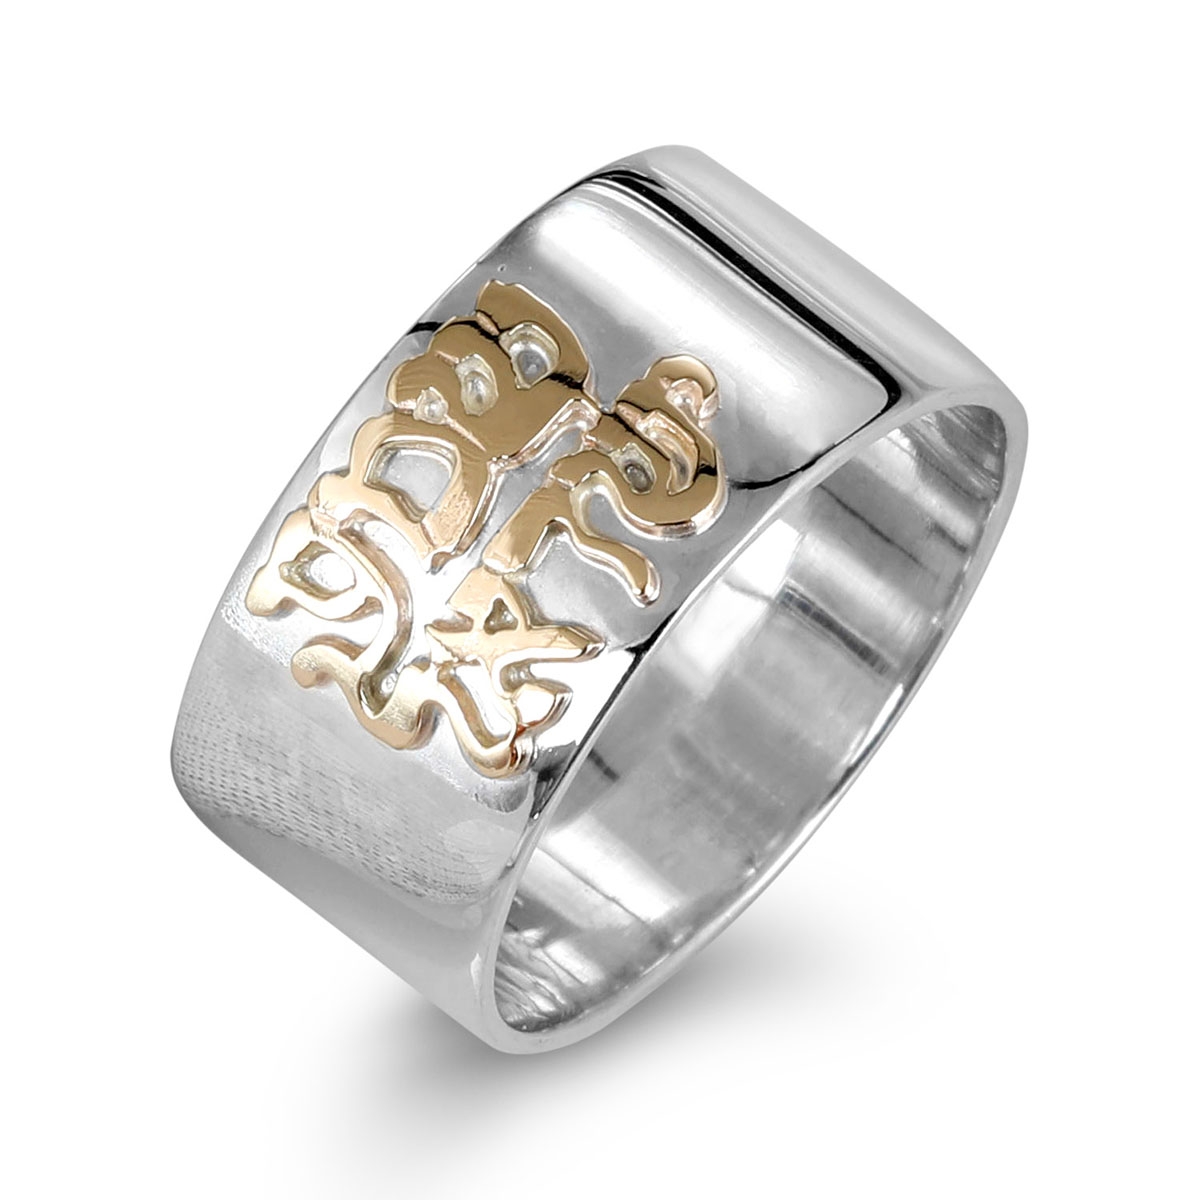 Sterling Silver and Gold Shema Yisrael Ring - 1